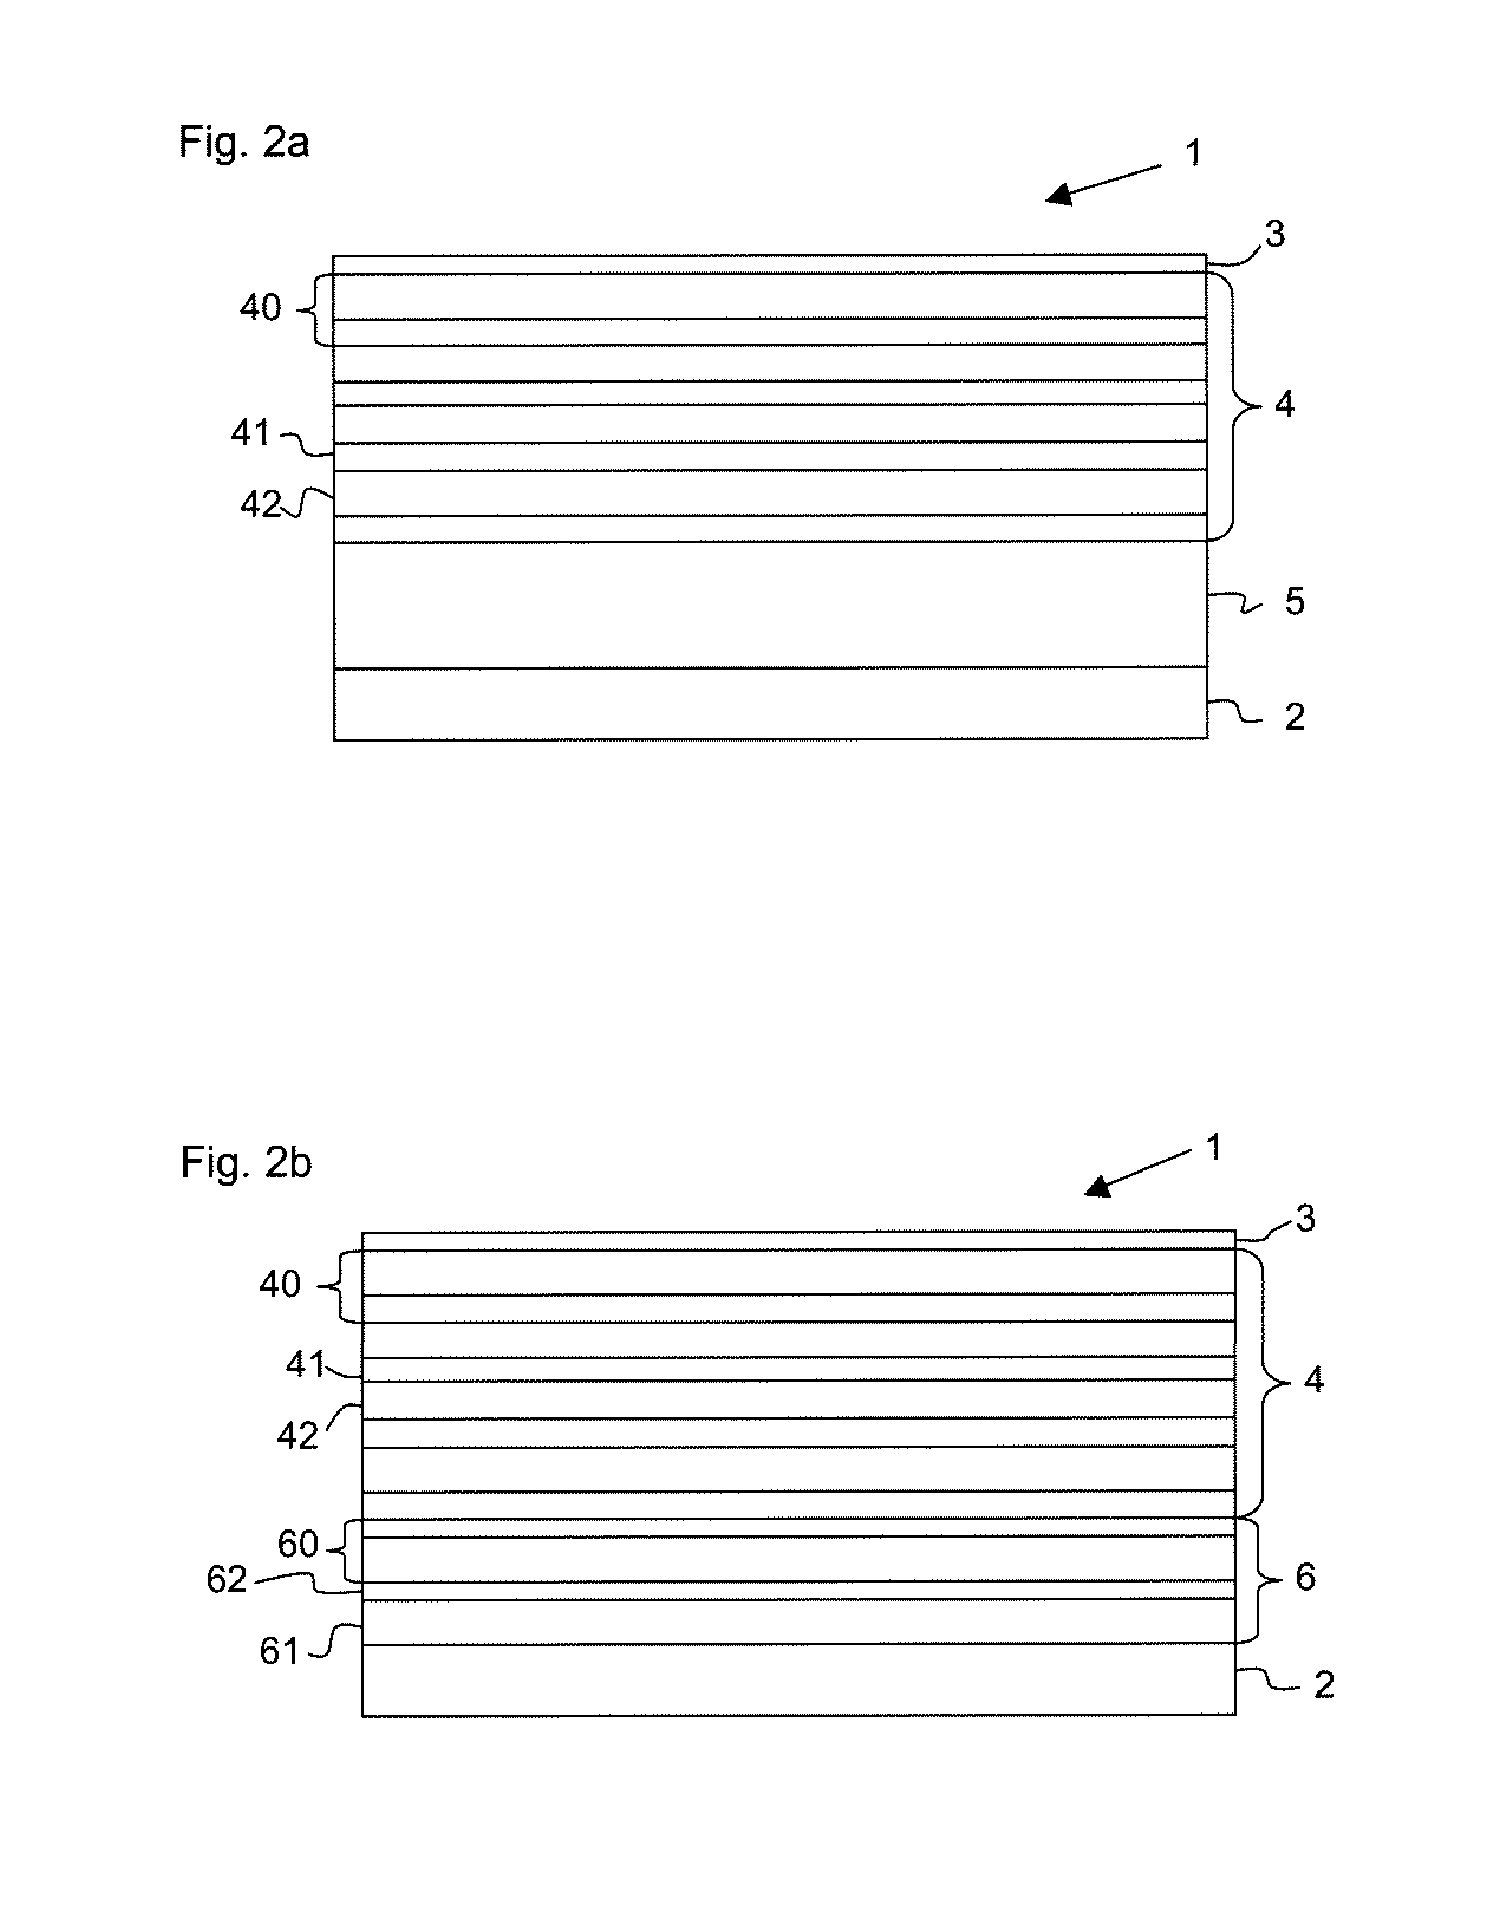 Reflective optical element and method for production of such an optical element